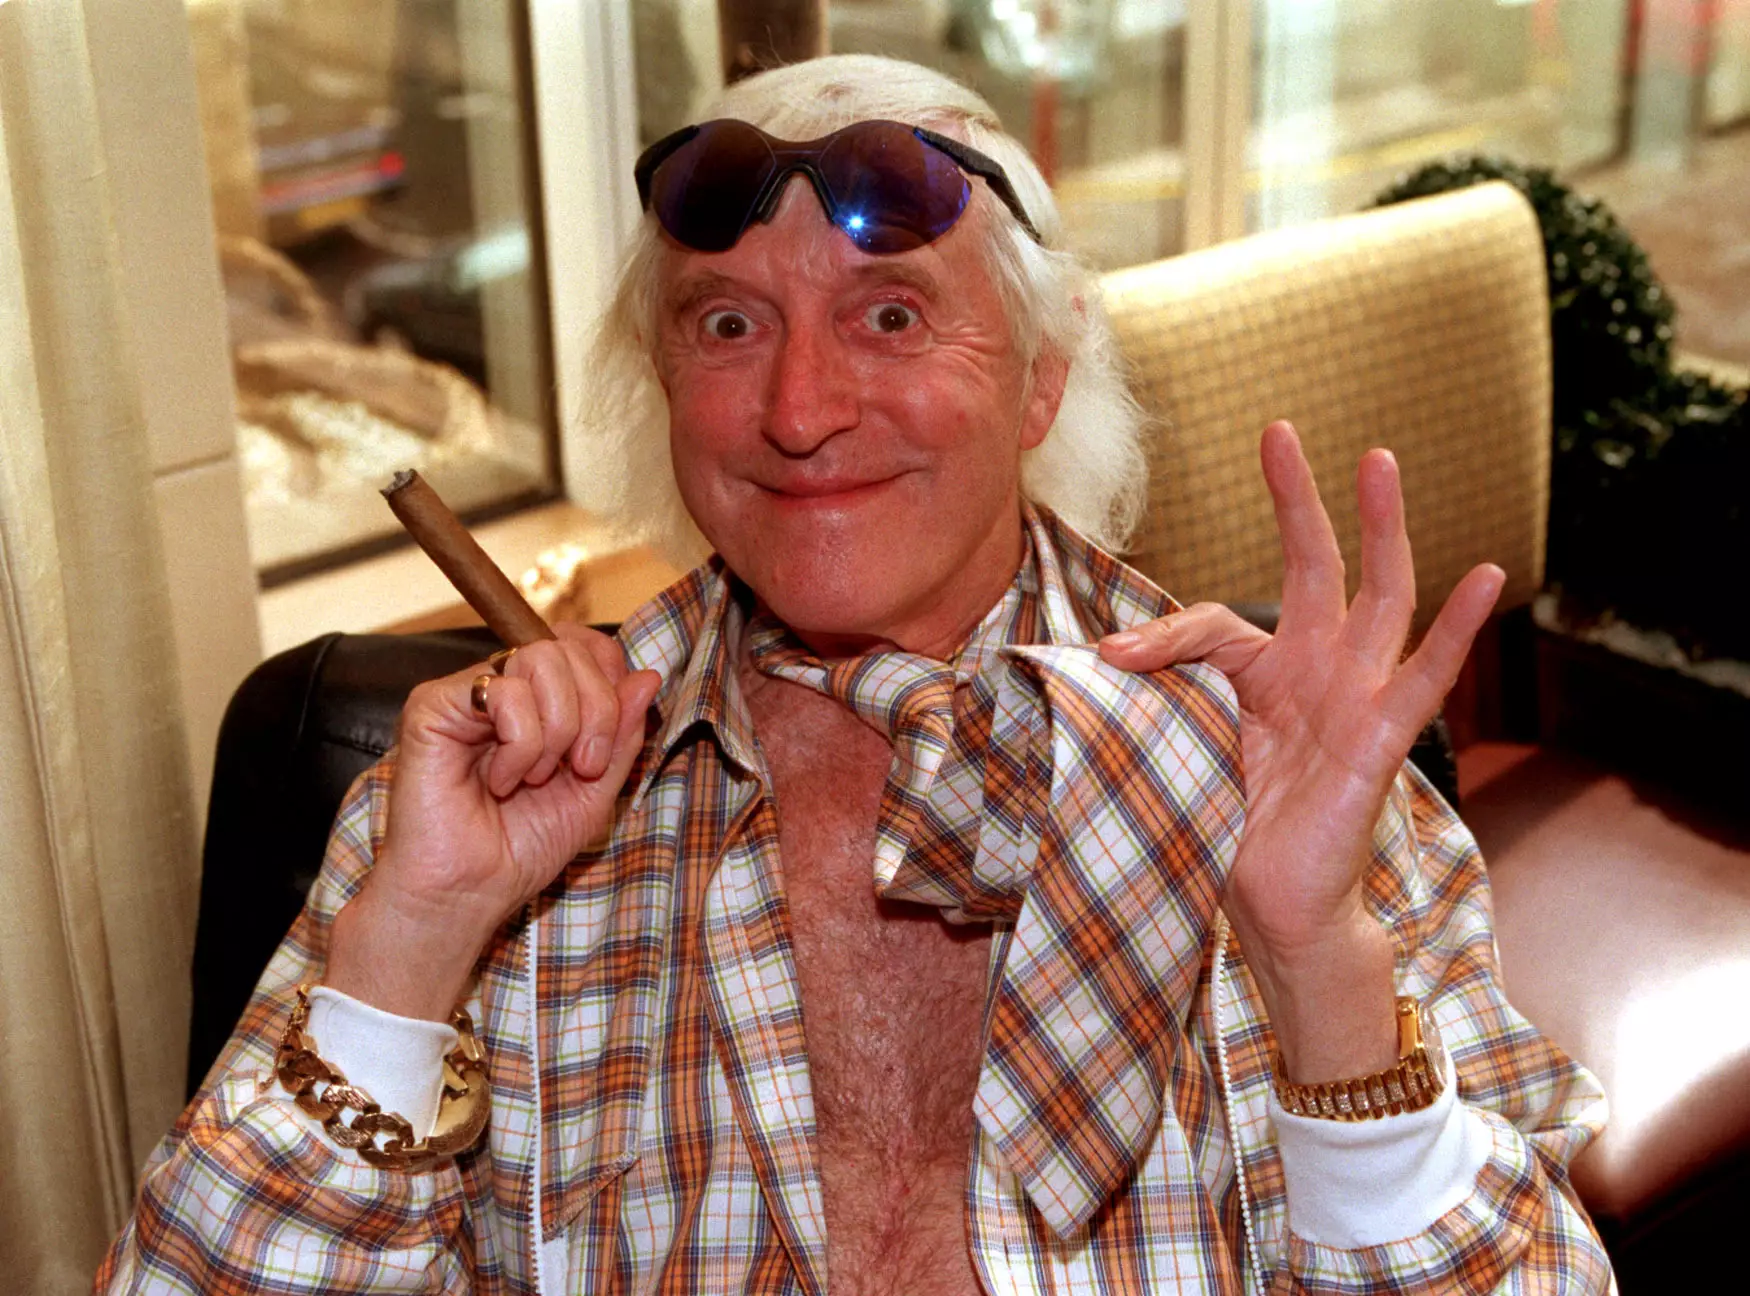 The series will centre around Jimmy Savile's life - and his disgrace after death (